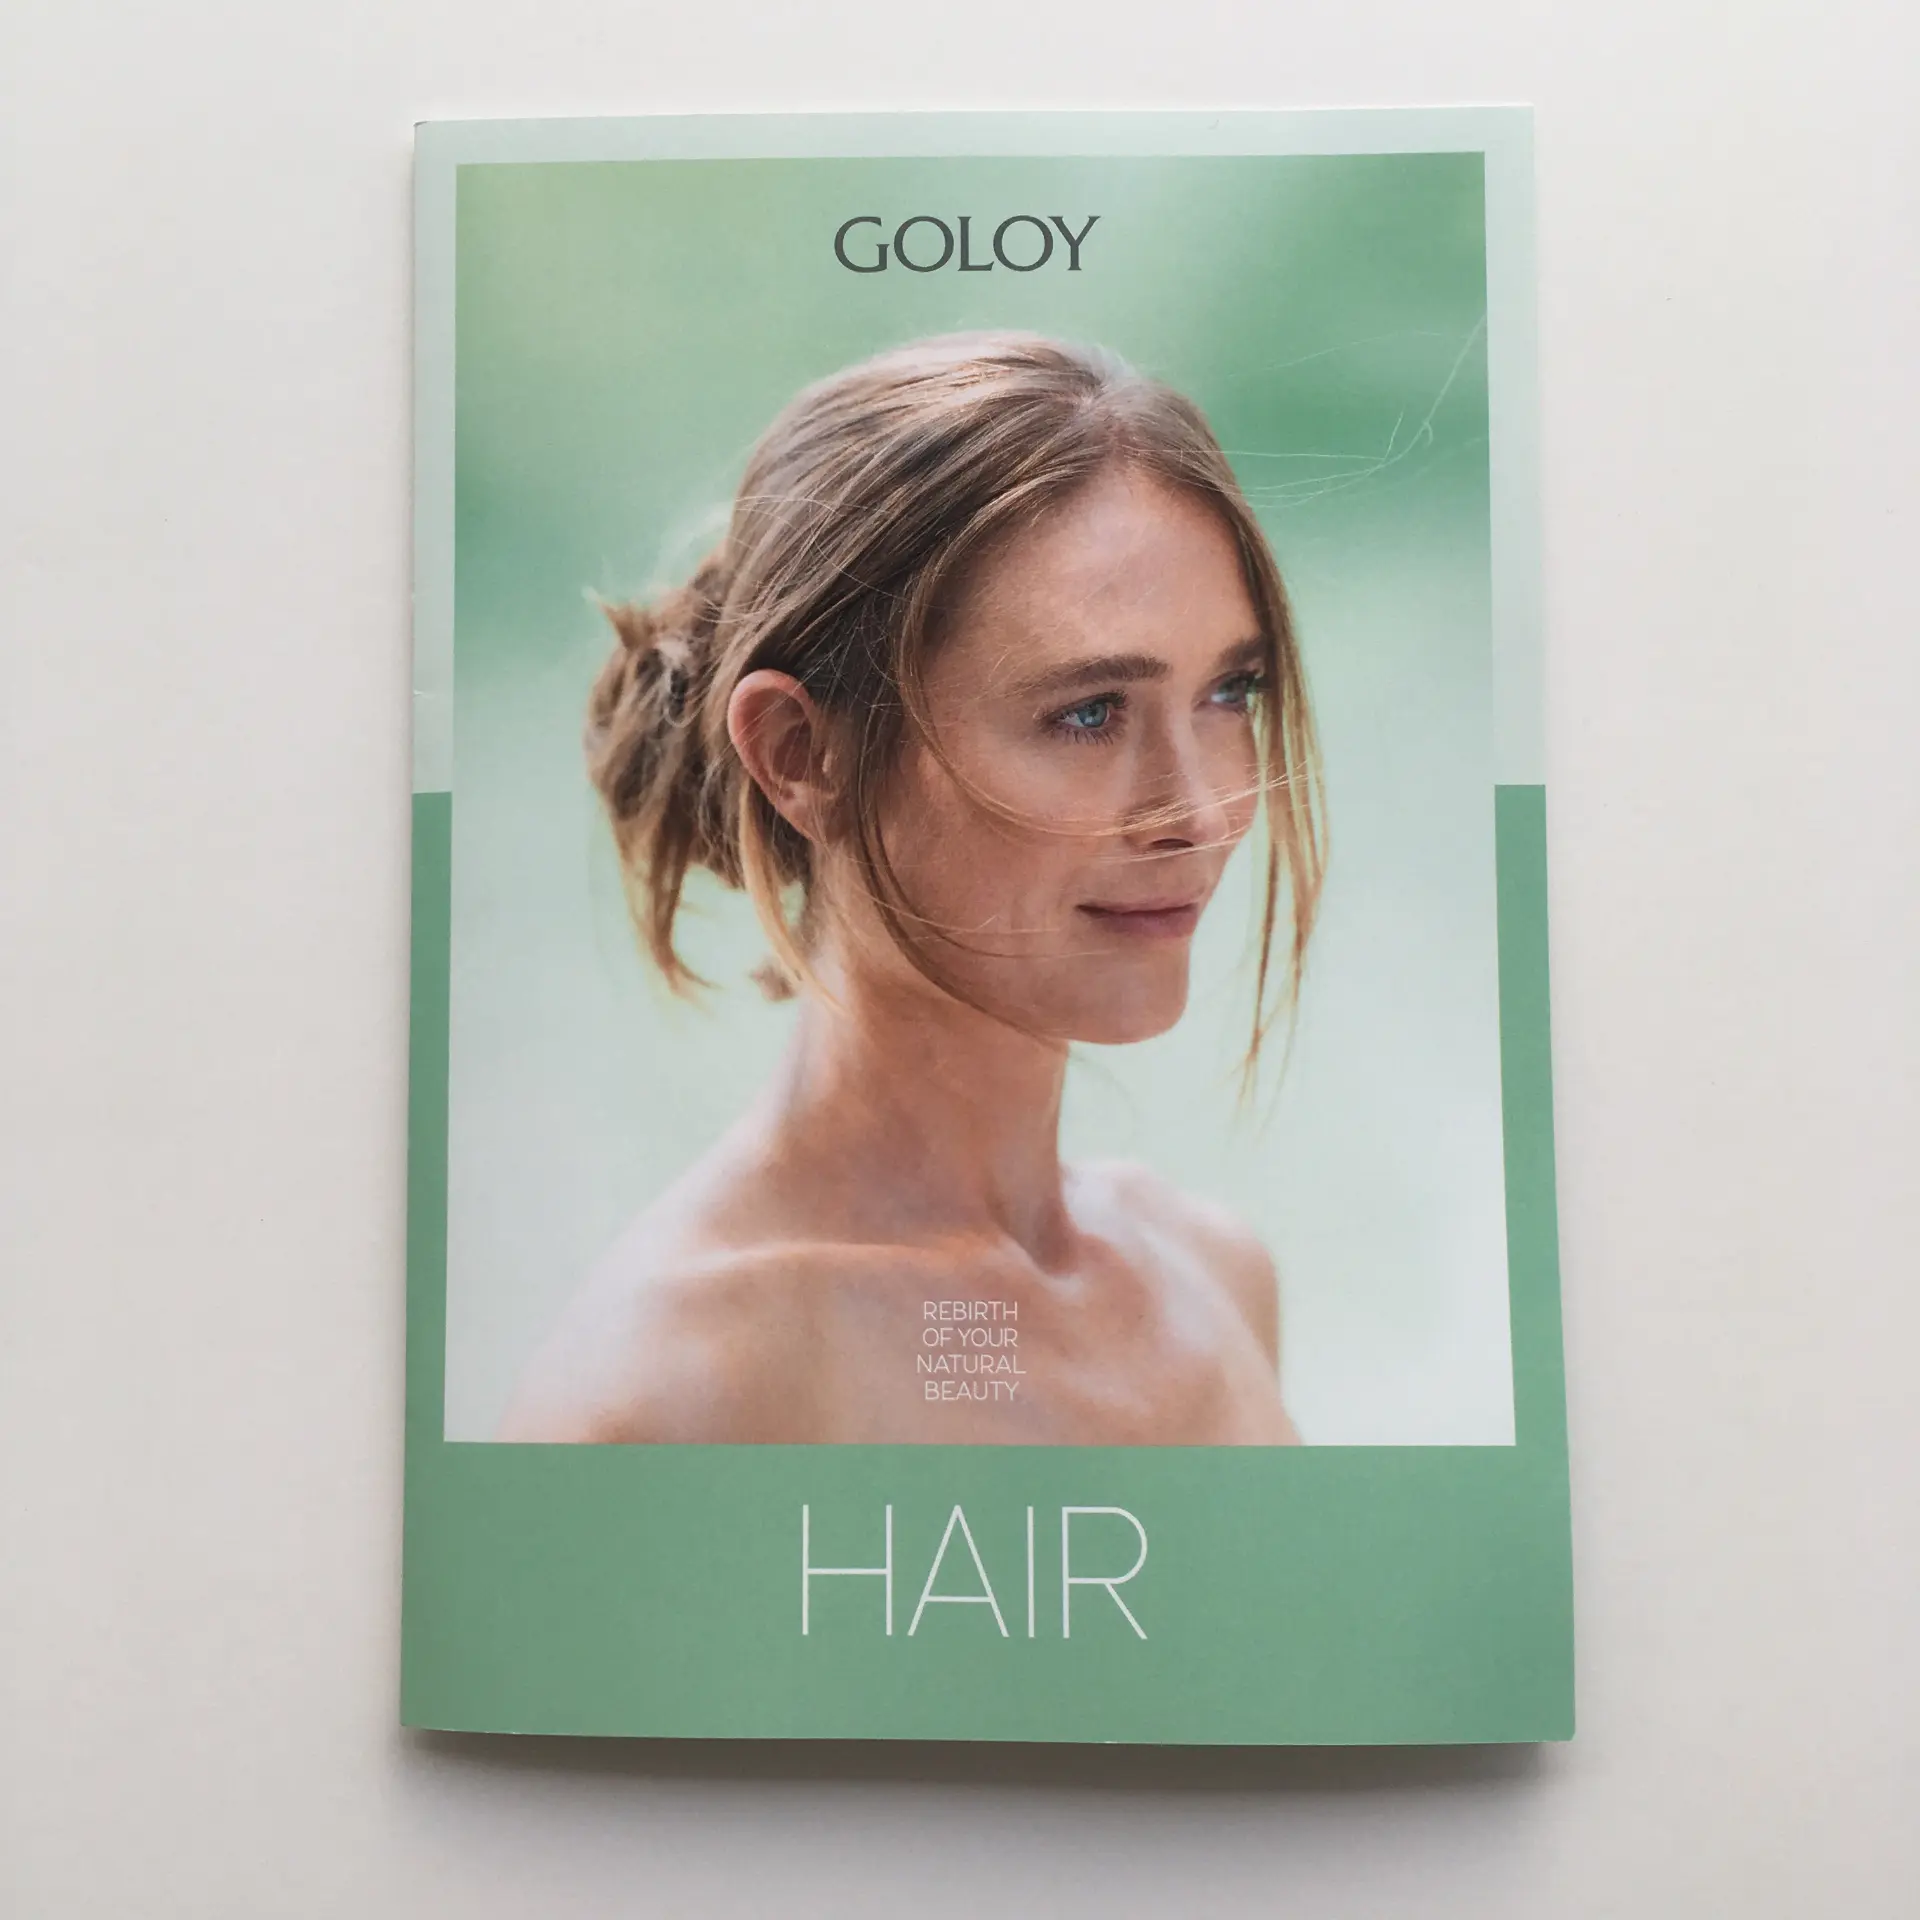 Goloy Shampoo Fine Normal Hair | Conditioner Sample